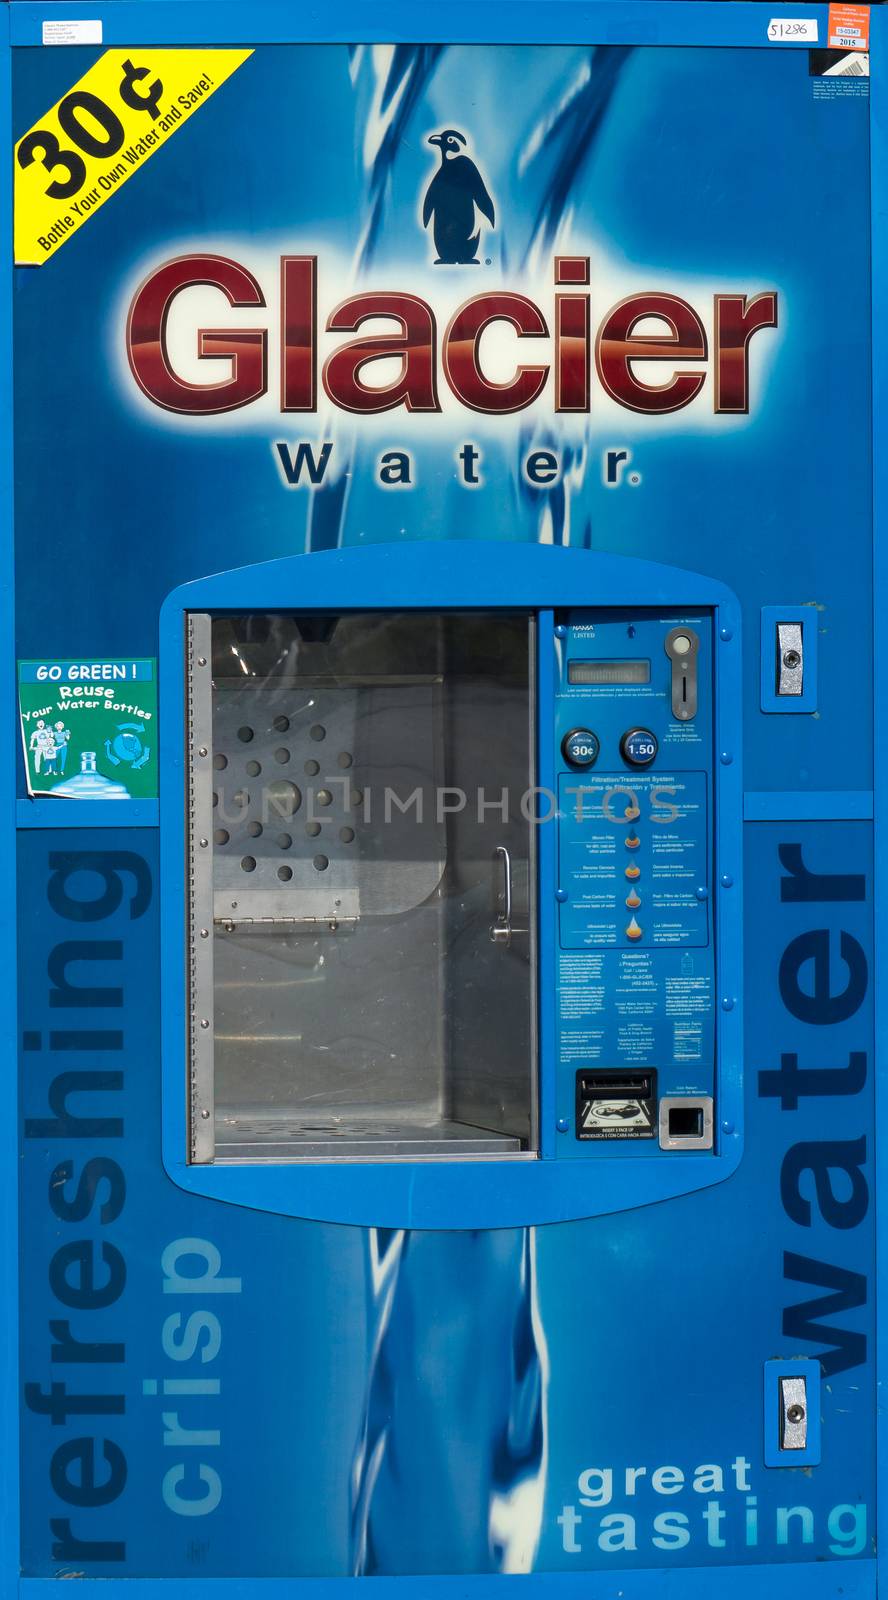 CANYON COUNTRY, CA/USA - MAY 31, 2015: Glacier Water machine. Glacier Water owns and operates Water and Ice vending machines in North America.